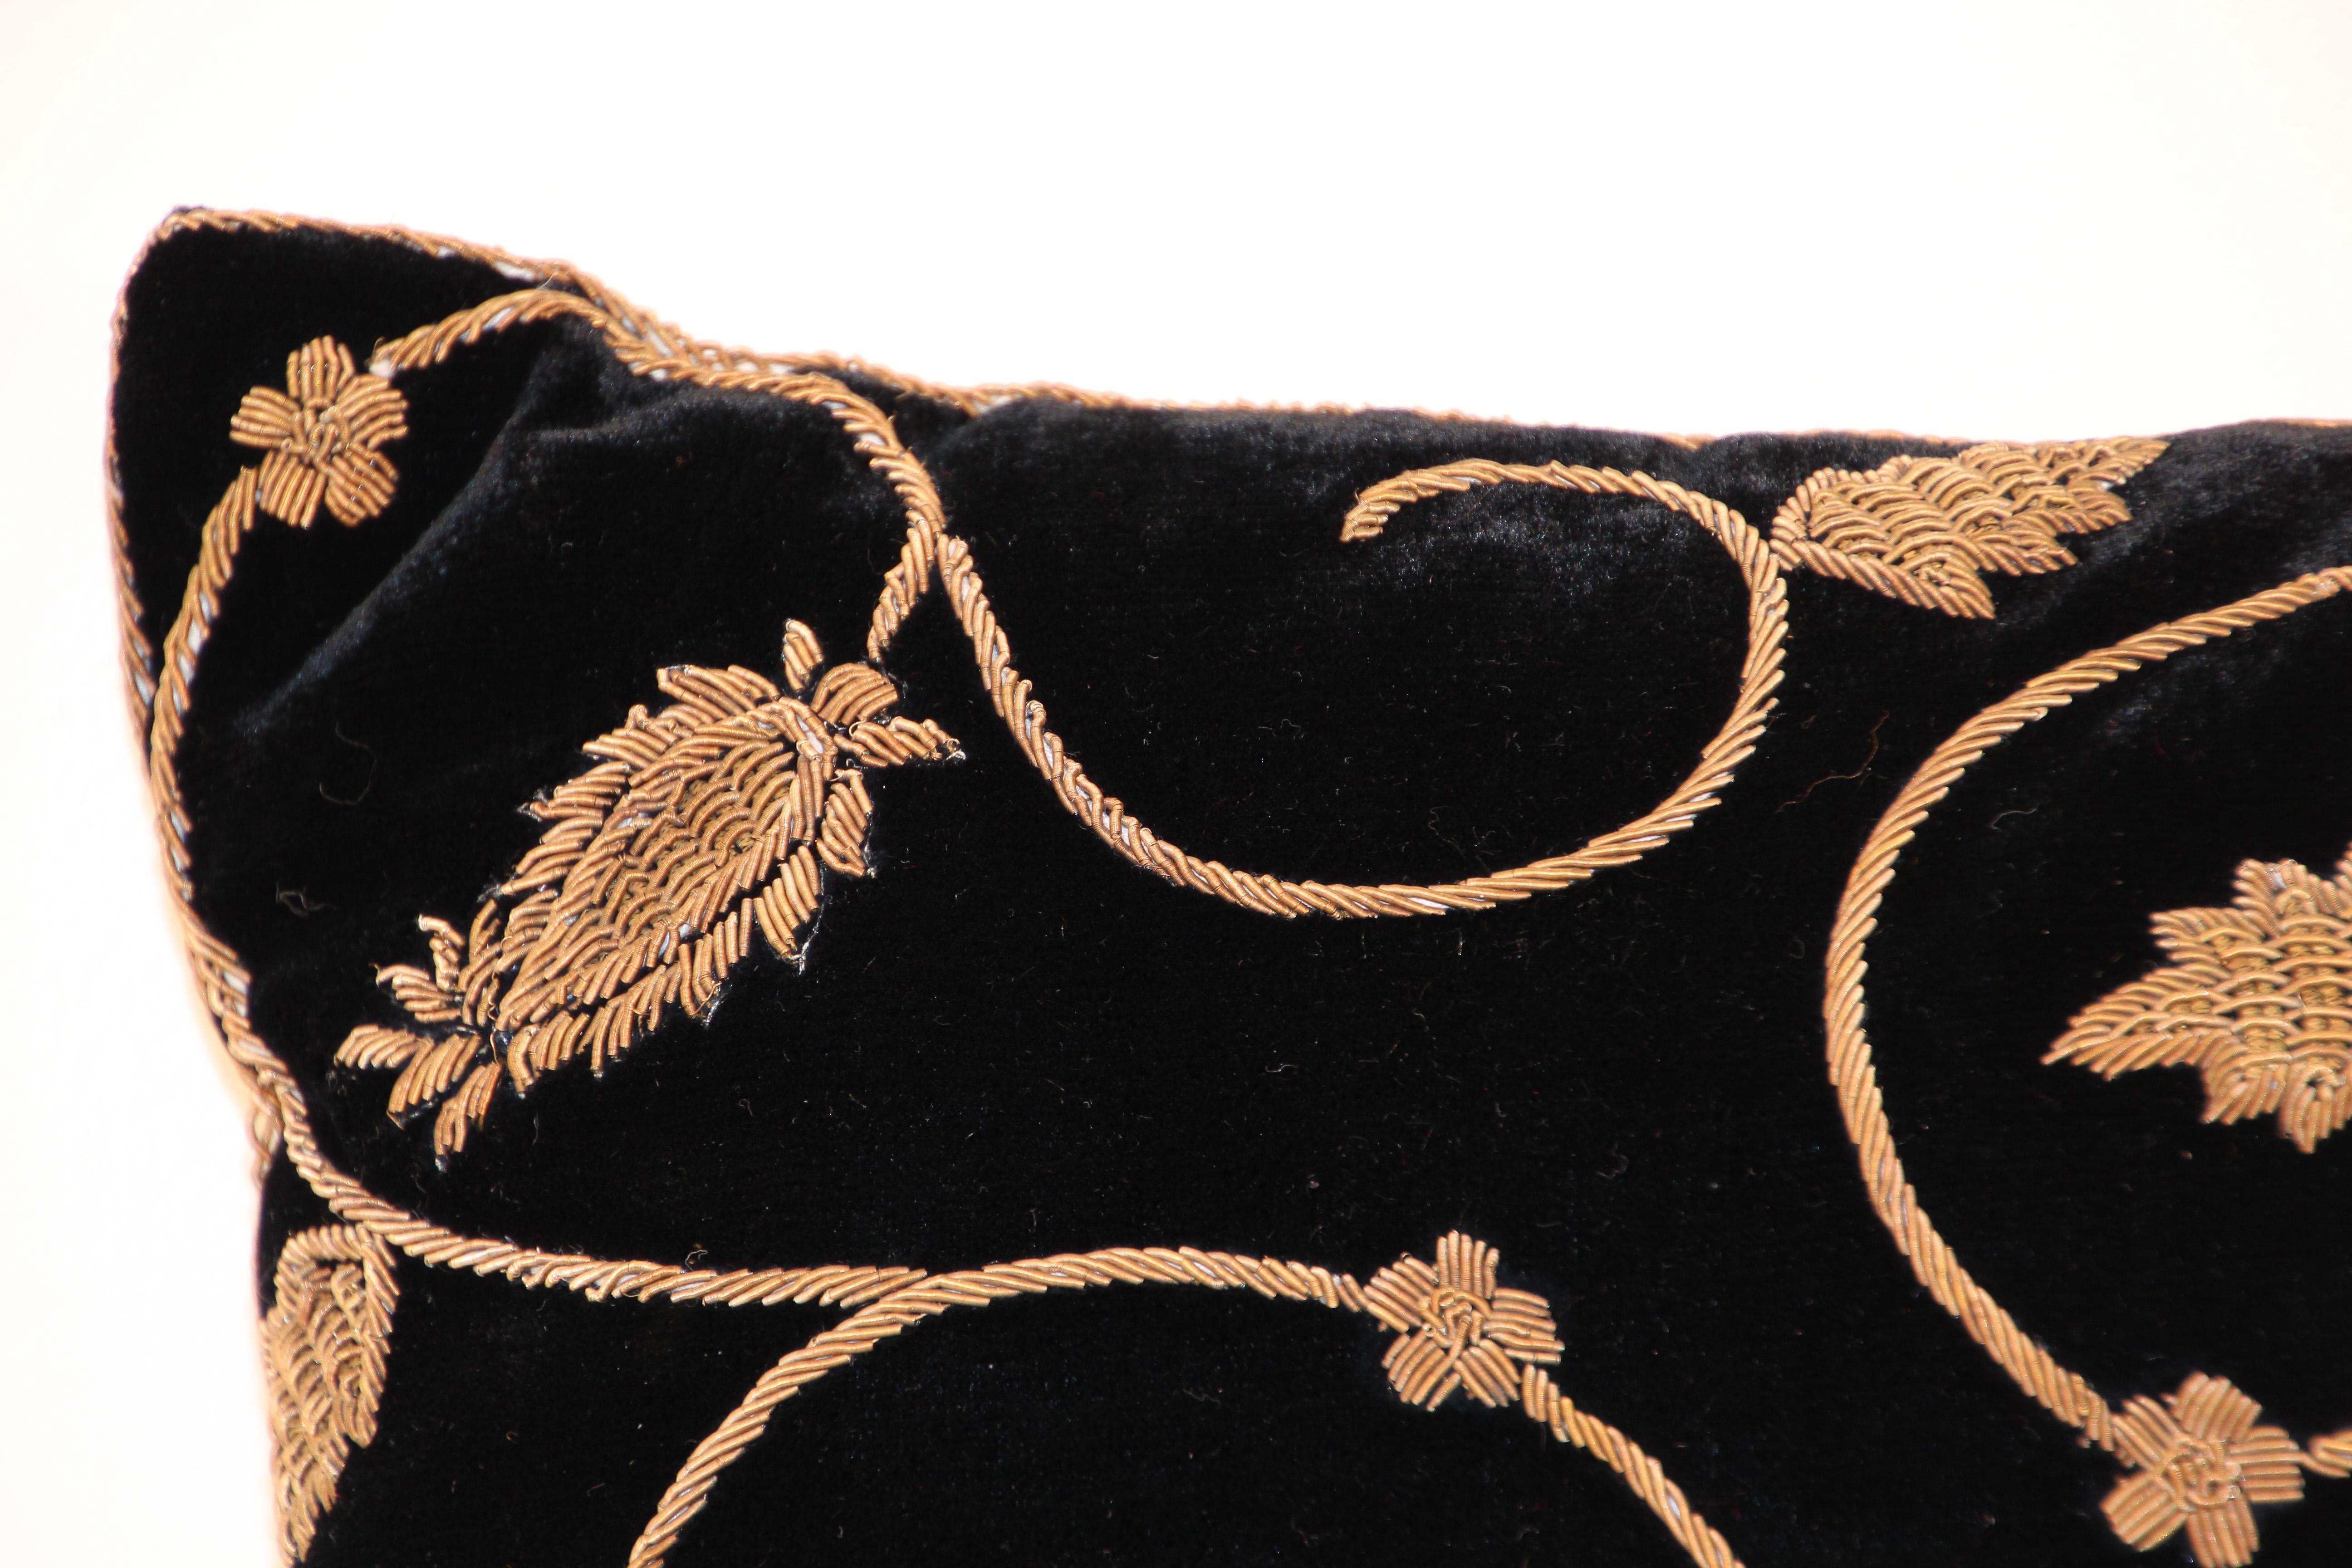 Black silk Velvet pillow hand embroidered with gold threads.
The pattern is on the front of the pillow. 
Handcrafted throw pillow with zipper.
Measures: 15